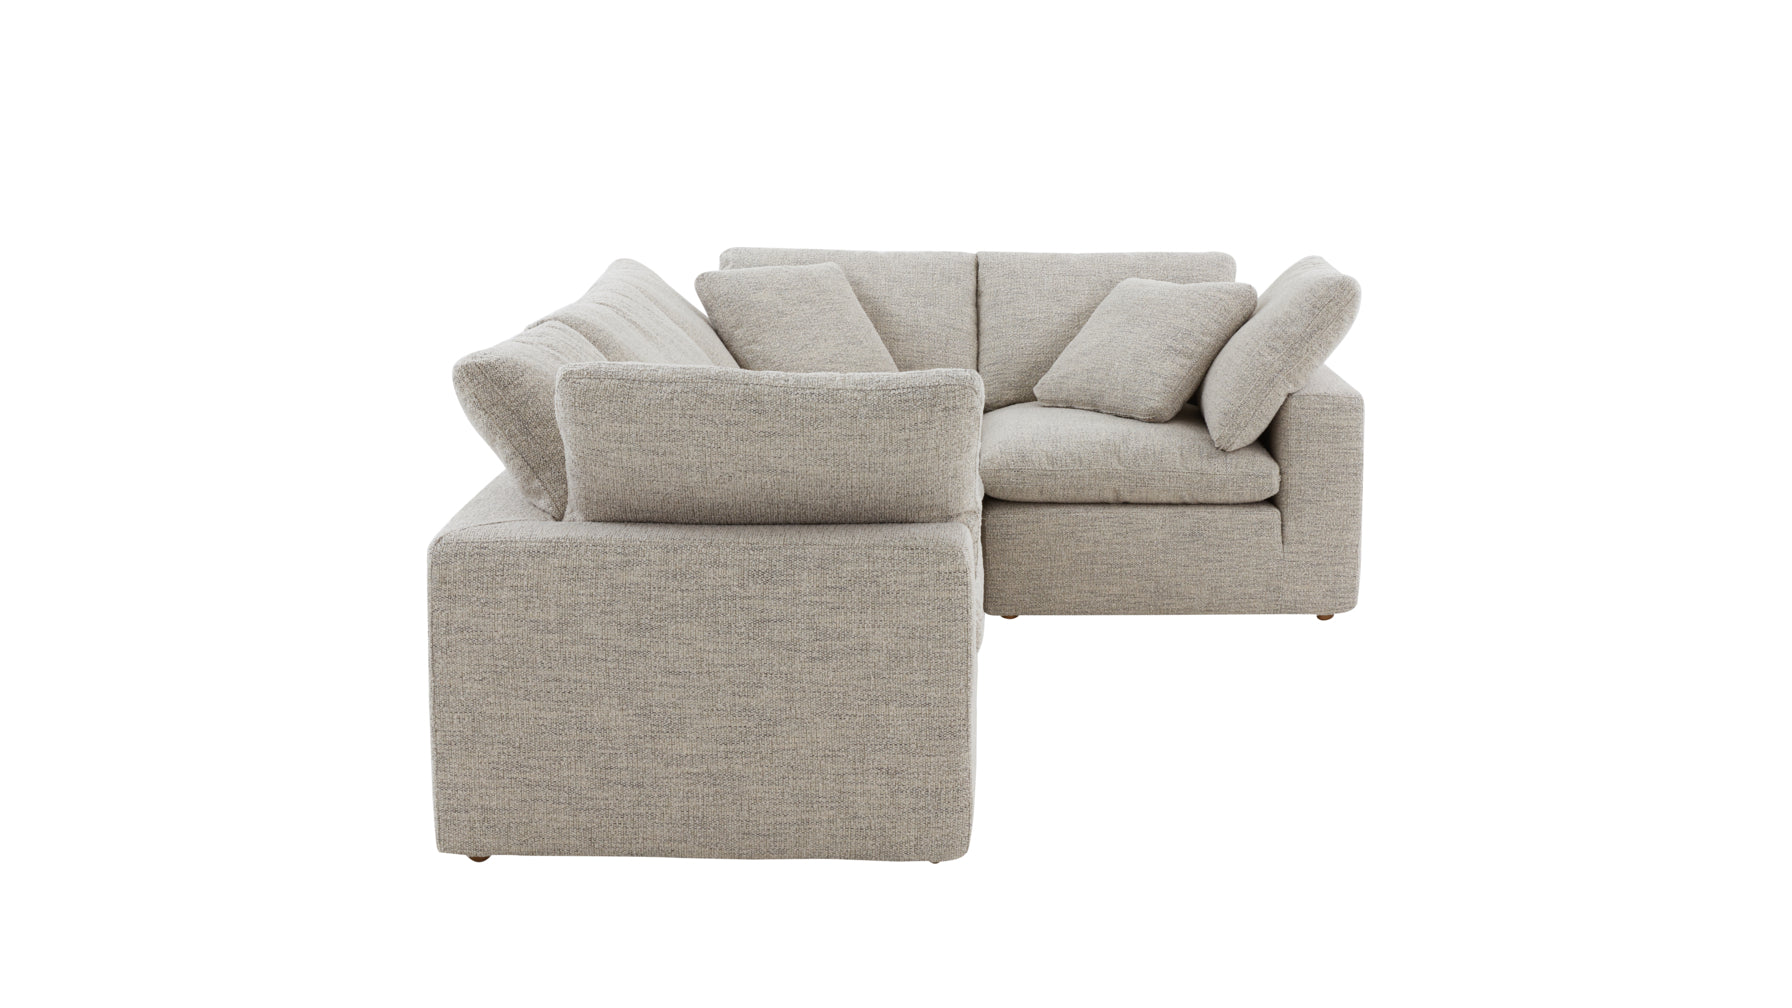 Movie Night™ 4-Piece Modular Sectional Closed, Large, Oatmeal - Image 7